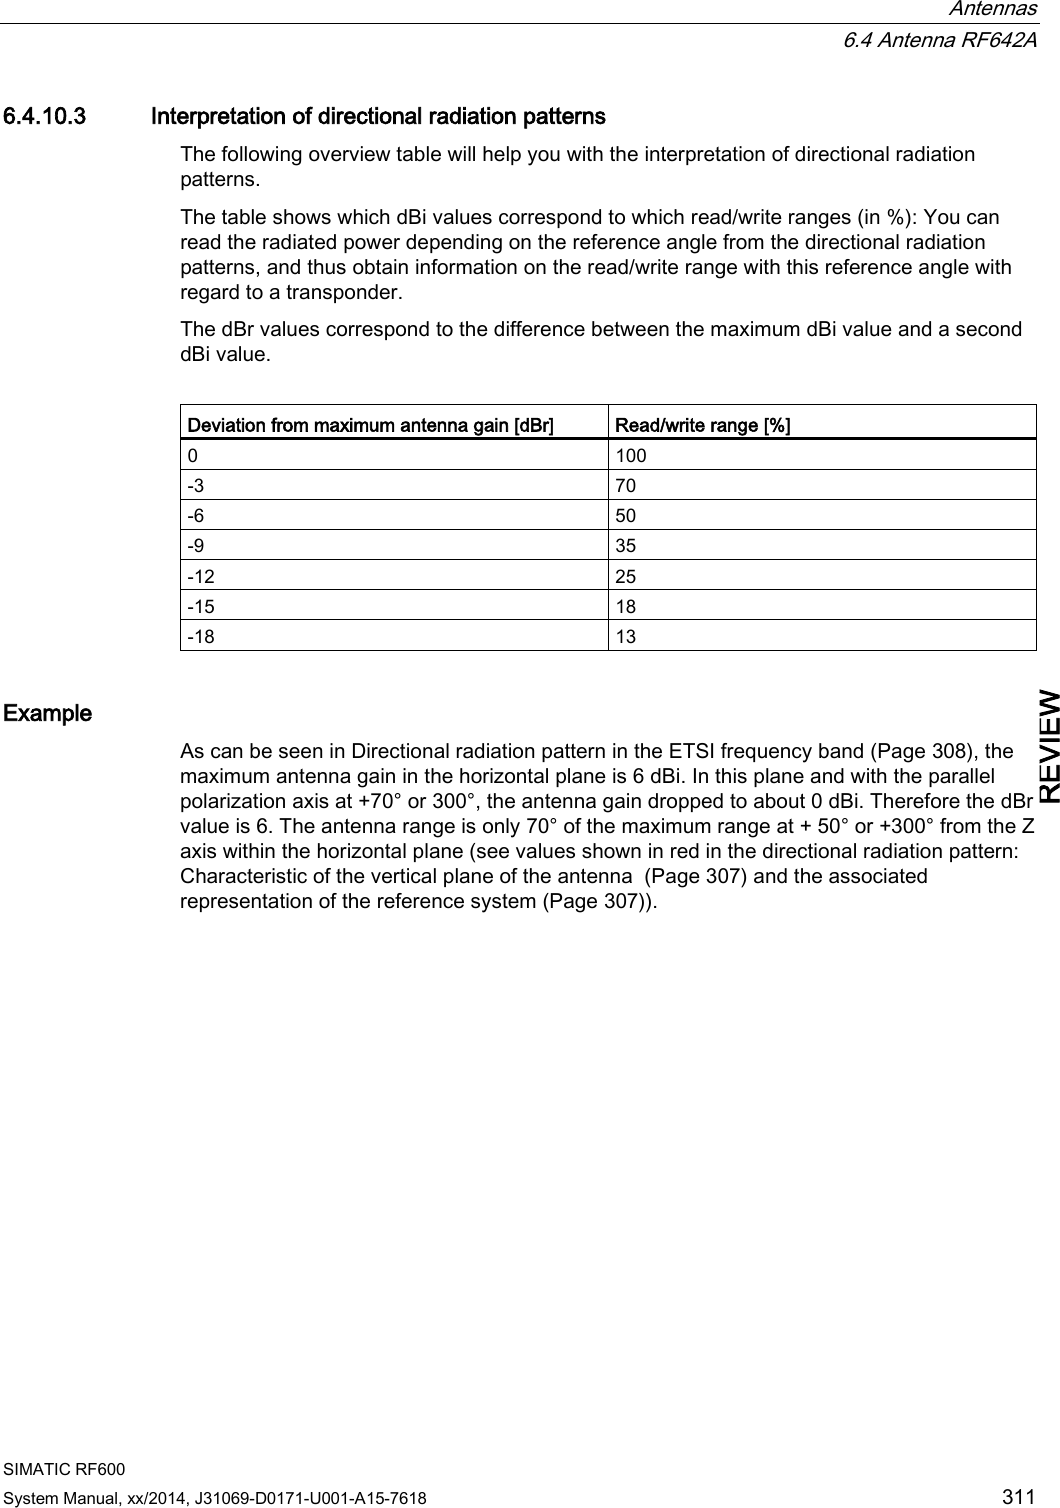  Antennas  6.4 Antenna RF642A SIMATIC RF600 System Manual, xx/2014, J31069-D0171-U001-A15-7618 311 REVIEW 6.4.10.3 Interpretation of directional radiation patterns The following overview table will help you with the interpretation of directional radiation patterns.  The table shows which dBi values correspond to which read/write ranges (in %): You can read the radiated power depending on the reference angle from the directional radiation patterns, and thus obtain information on the read/write range with this reference angle with regard to a transponder. The dBr values correspond to the difference between the maximum dBi value and a second dBi value.  Deviation from maximum antenna gain [dBr] Read/write range [%] 0 100 -3 70 -6 50 -9 35 -12 25 -15 18 -18 13 Example As can be seen in Directional radiation pattern in the ETSI frequency band (Page 308), the maximum antenna gain in the horizontal plane is 6 dBi. In this plane and with the parallel polarization axis at +70° or 300°, the antenna gain dropped to about 0 dBi. Therefore the dBr value is 6. The antenna range is only 70° of the maximum range at + 50° or +300° from the Z axis within the horizontal plane (see values shown in red in the directional radiation pattern: Characteristic of the vertical plane of the antenna  (Page 307) and the associated representation of the reference system (Page 307)). 